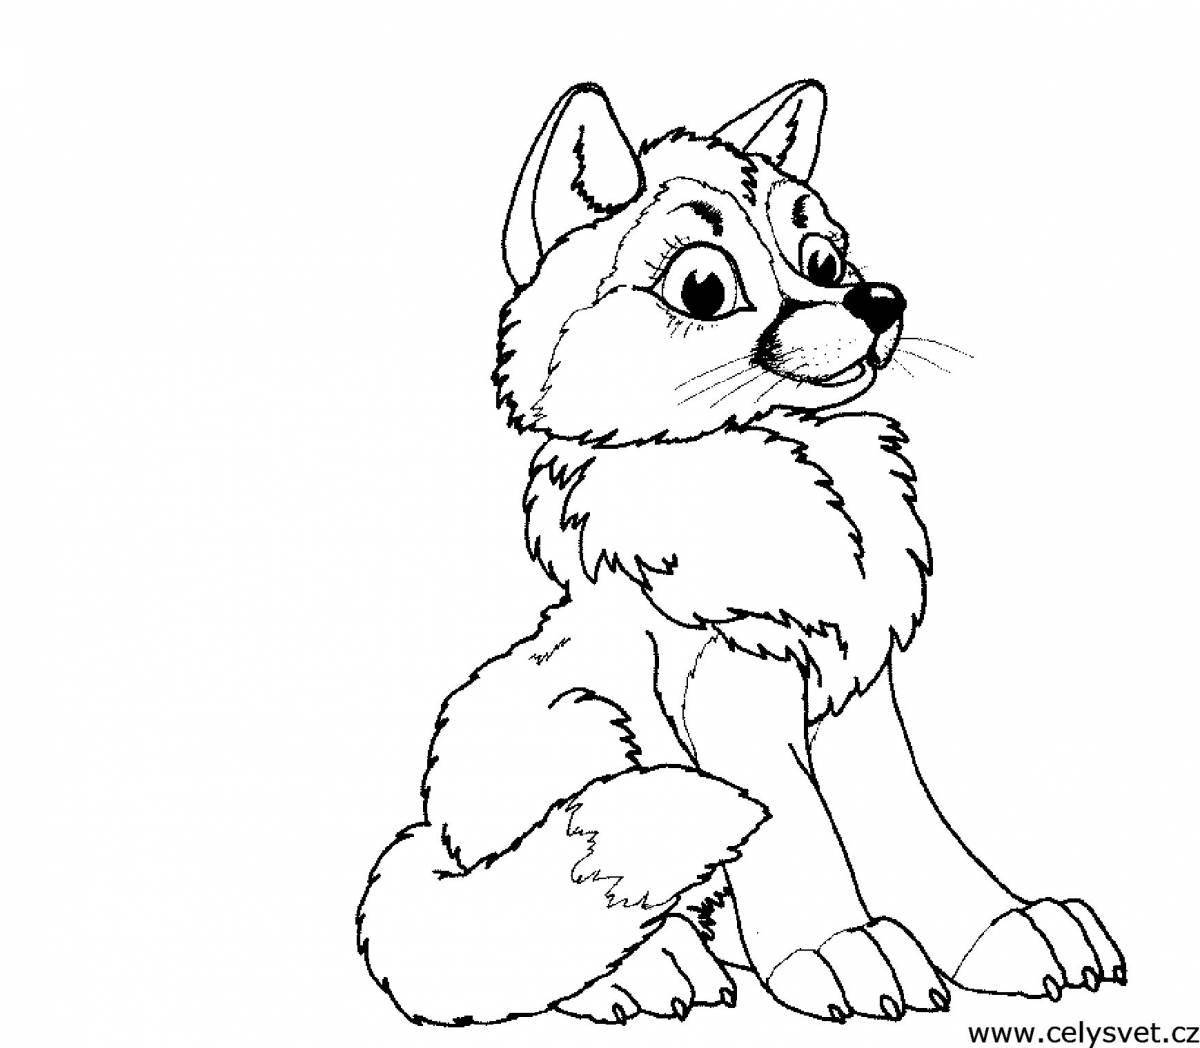 Live fox coloring pages for kids